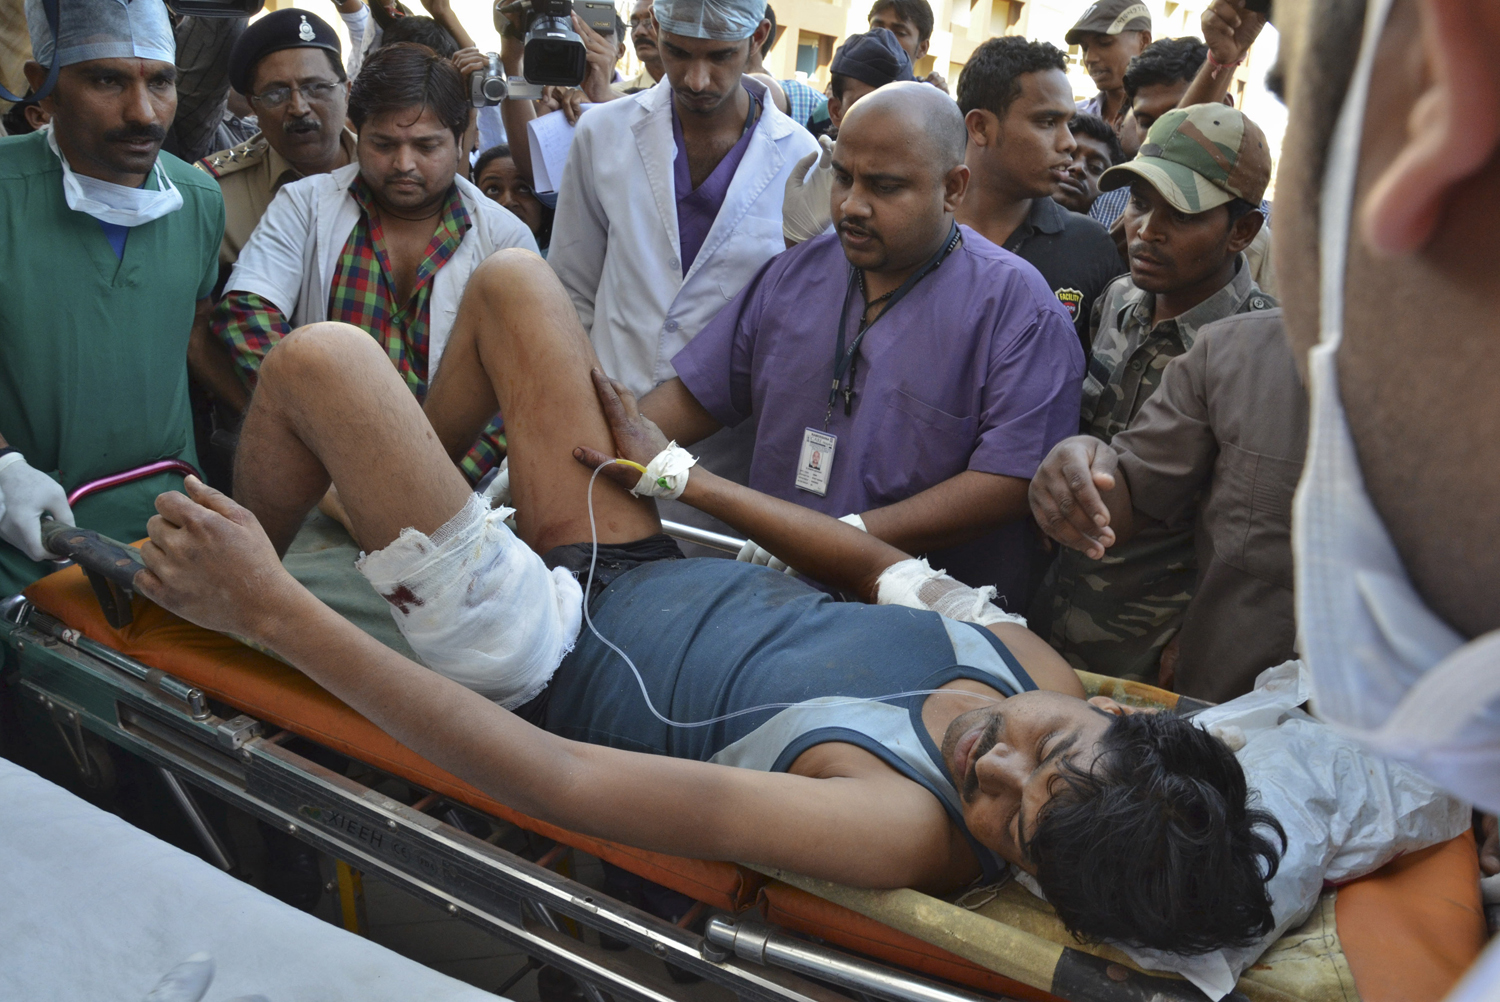 An injured Indian Central Reserve Police Force (CRPF) personnel is taken to a hospital at Raipur in the eastern Indian state of Chhattisgarh March 11, 2014. (Reuters)